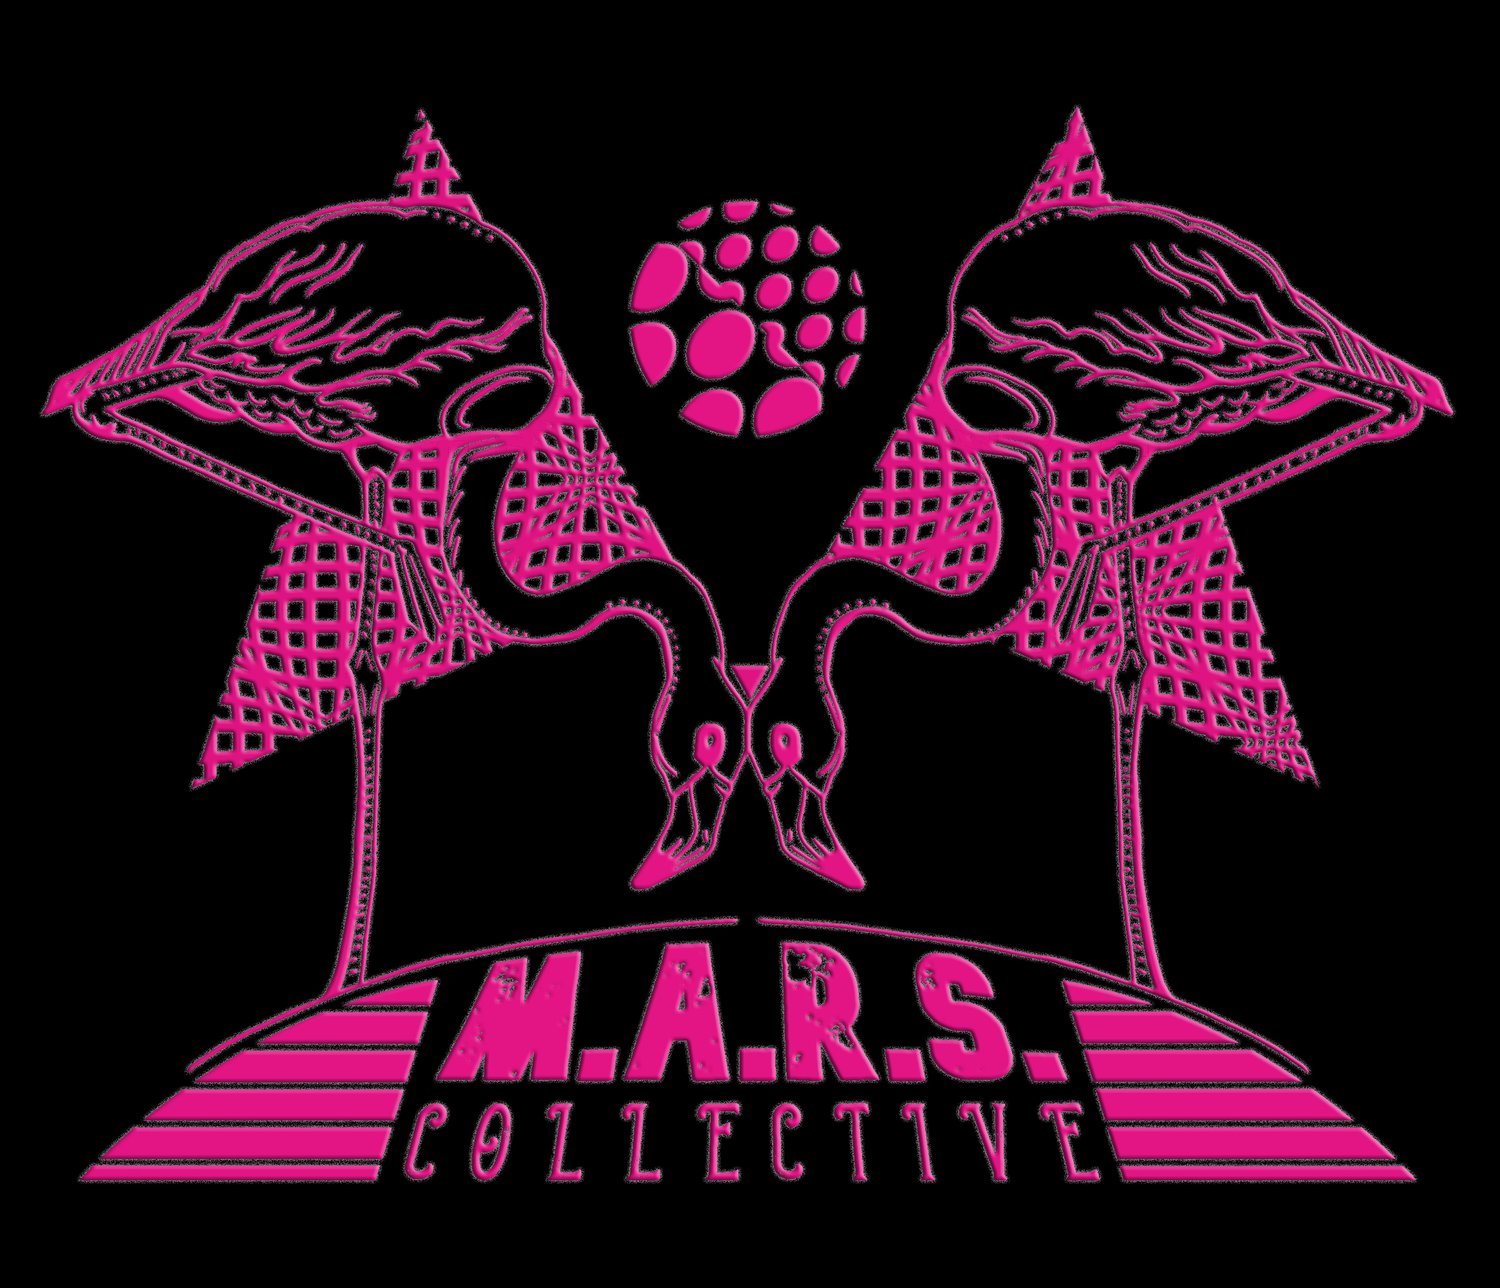 M.A.R.S. Collective